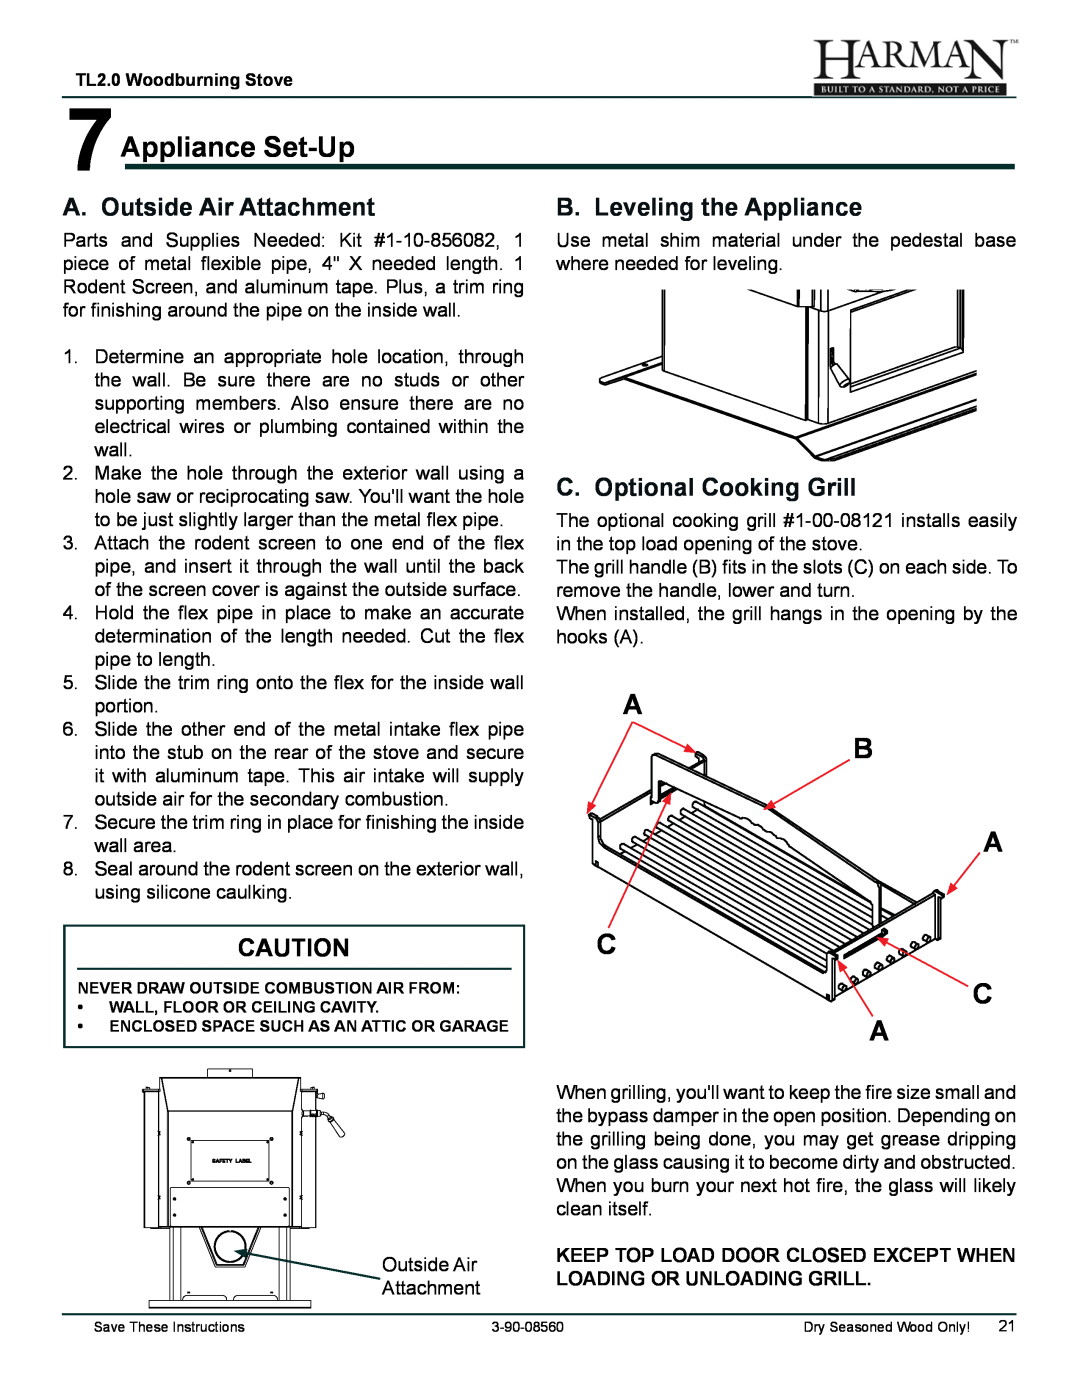 Harman Stove Company TL2.0 manual 7Appliance Set-Up, A B A, C C A, A. Outside Air Attachment, B. Leveling the Appliance 